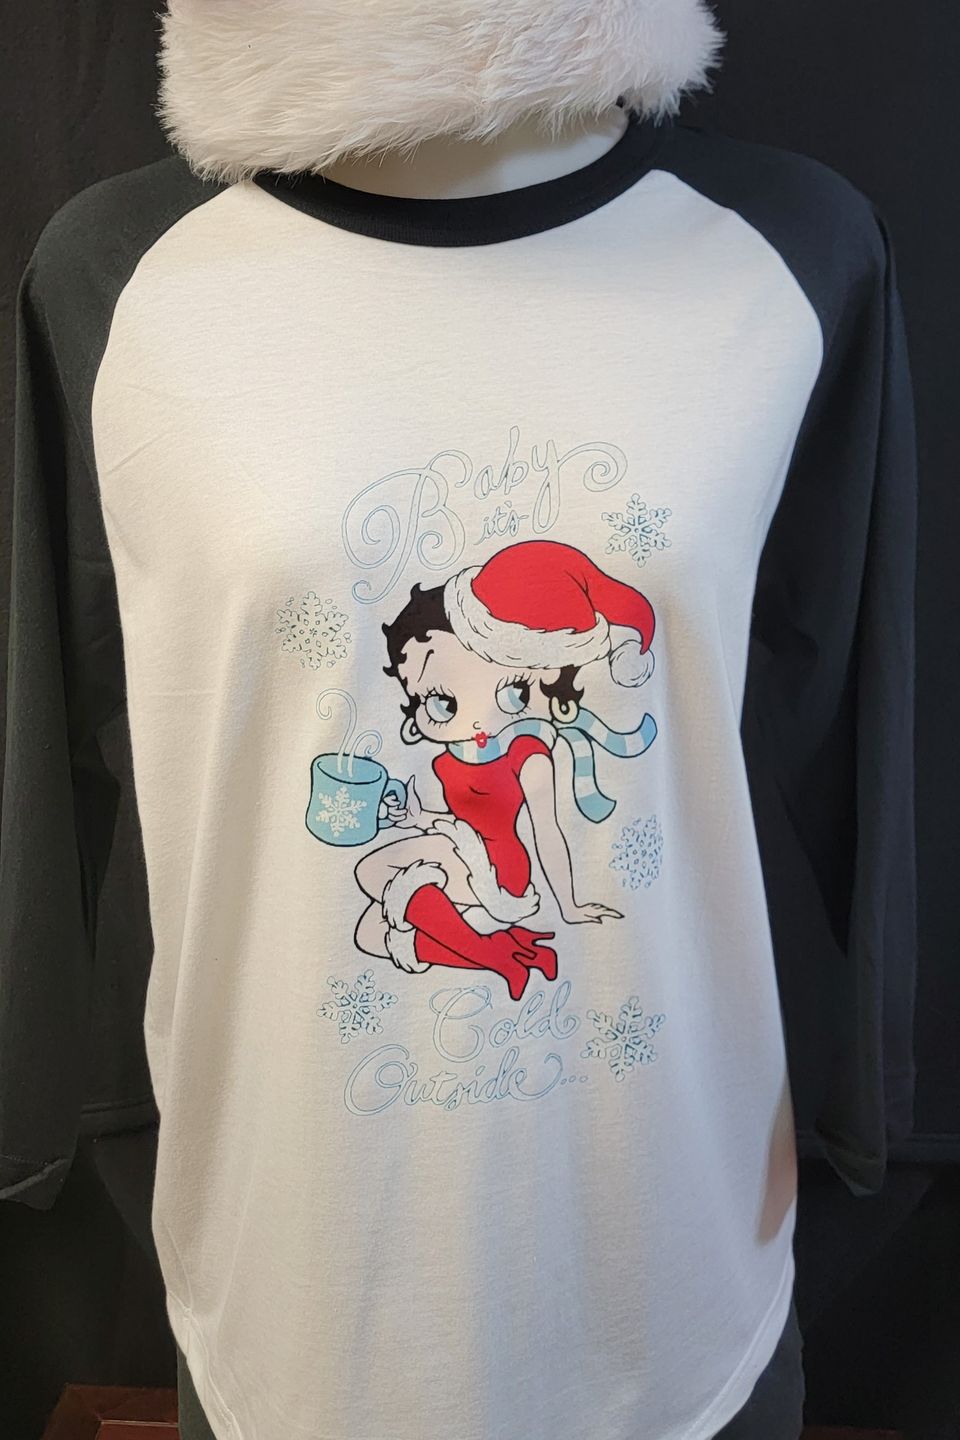 "Baby it's cold outside" Betty Boop t-shirt designed by SaRi's Creations using Direct to Film (DTF) technique. 